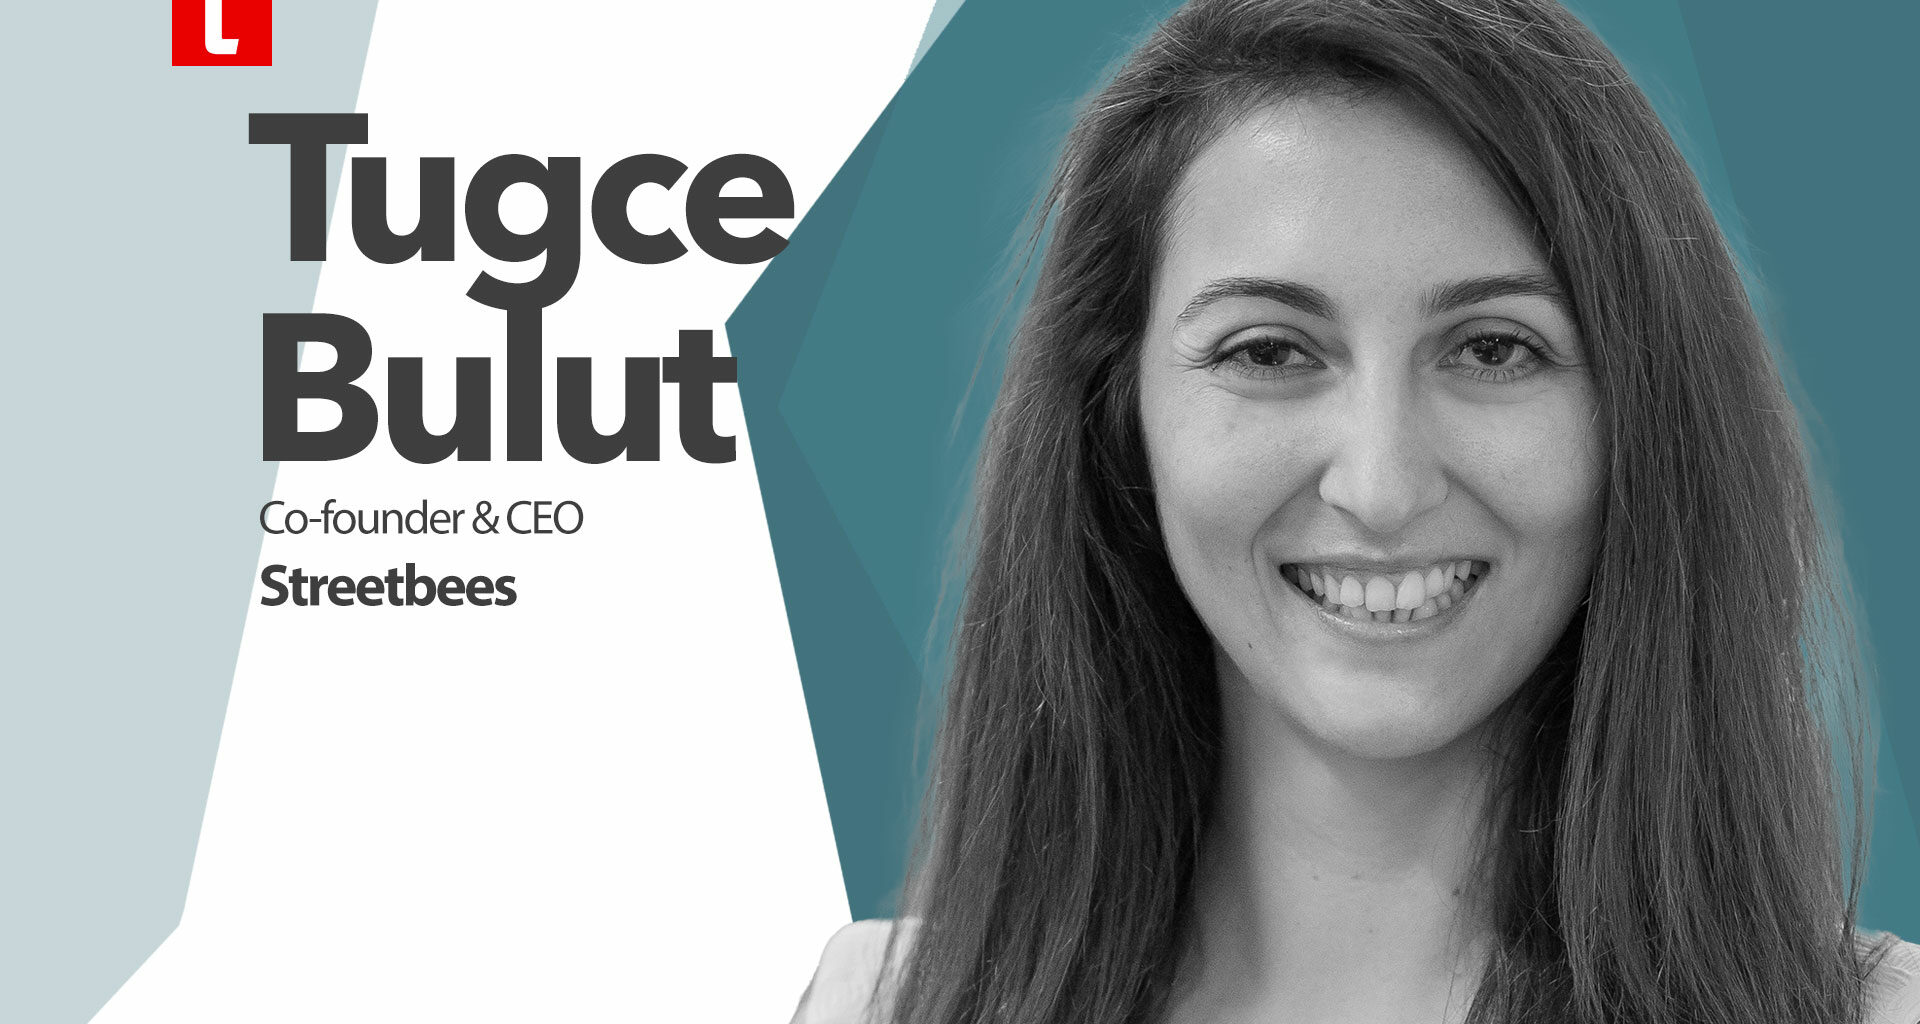 consumer research - Tugce Bulut of Streetbees